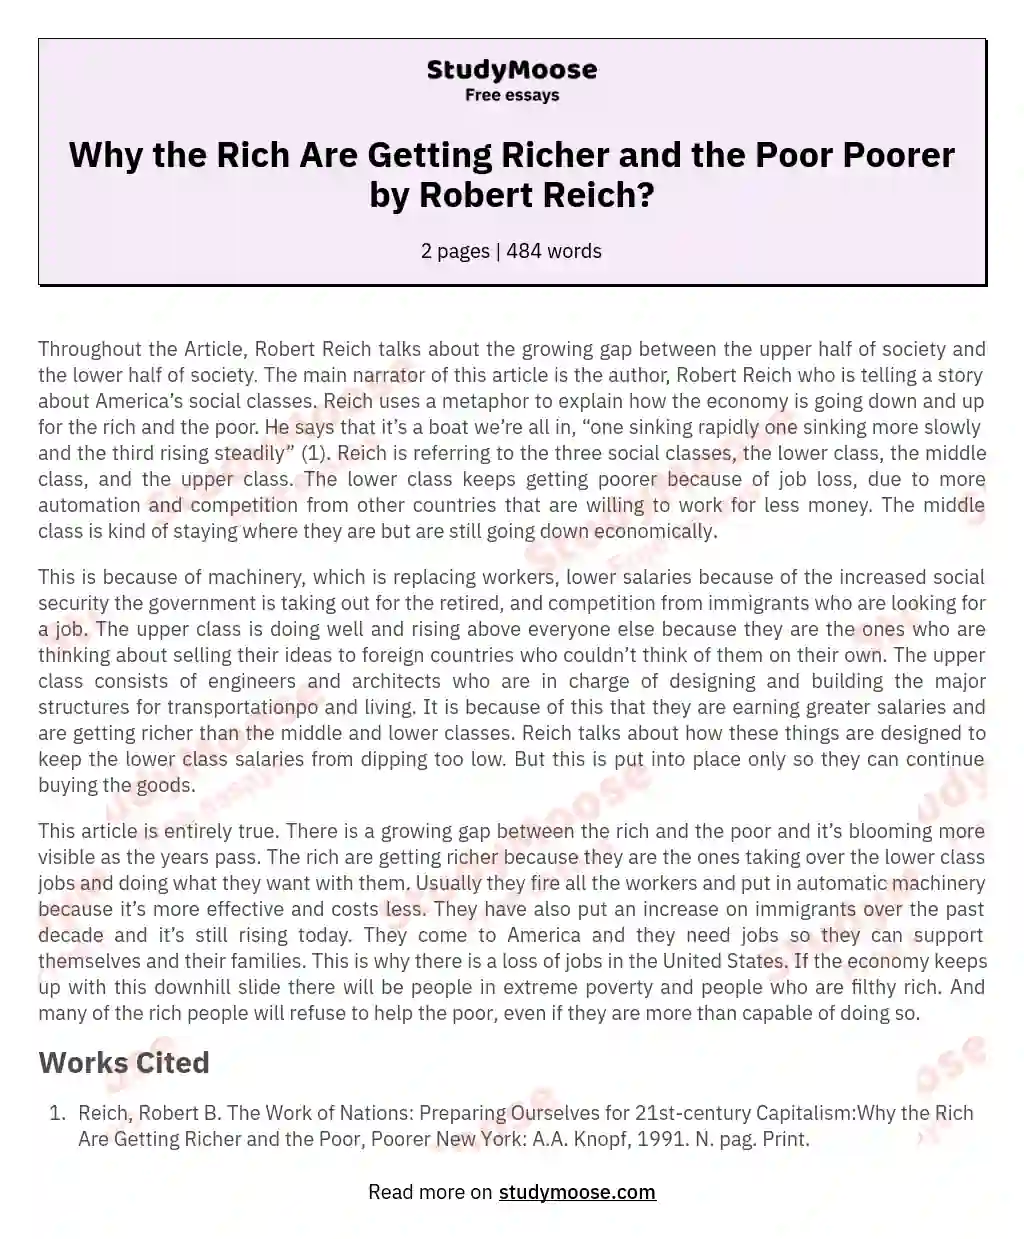 Why the Rich Are Getting Richer and the Poor Poorer by Robert Reich? essay